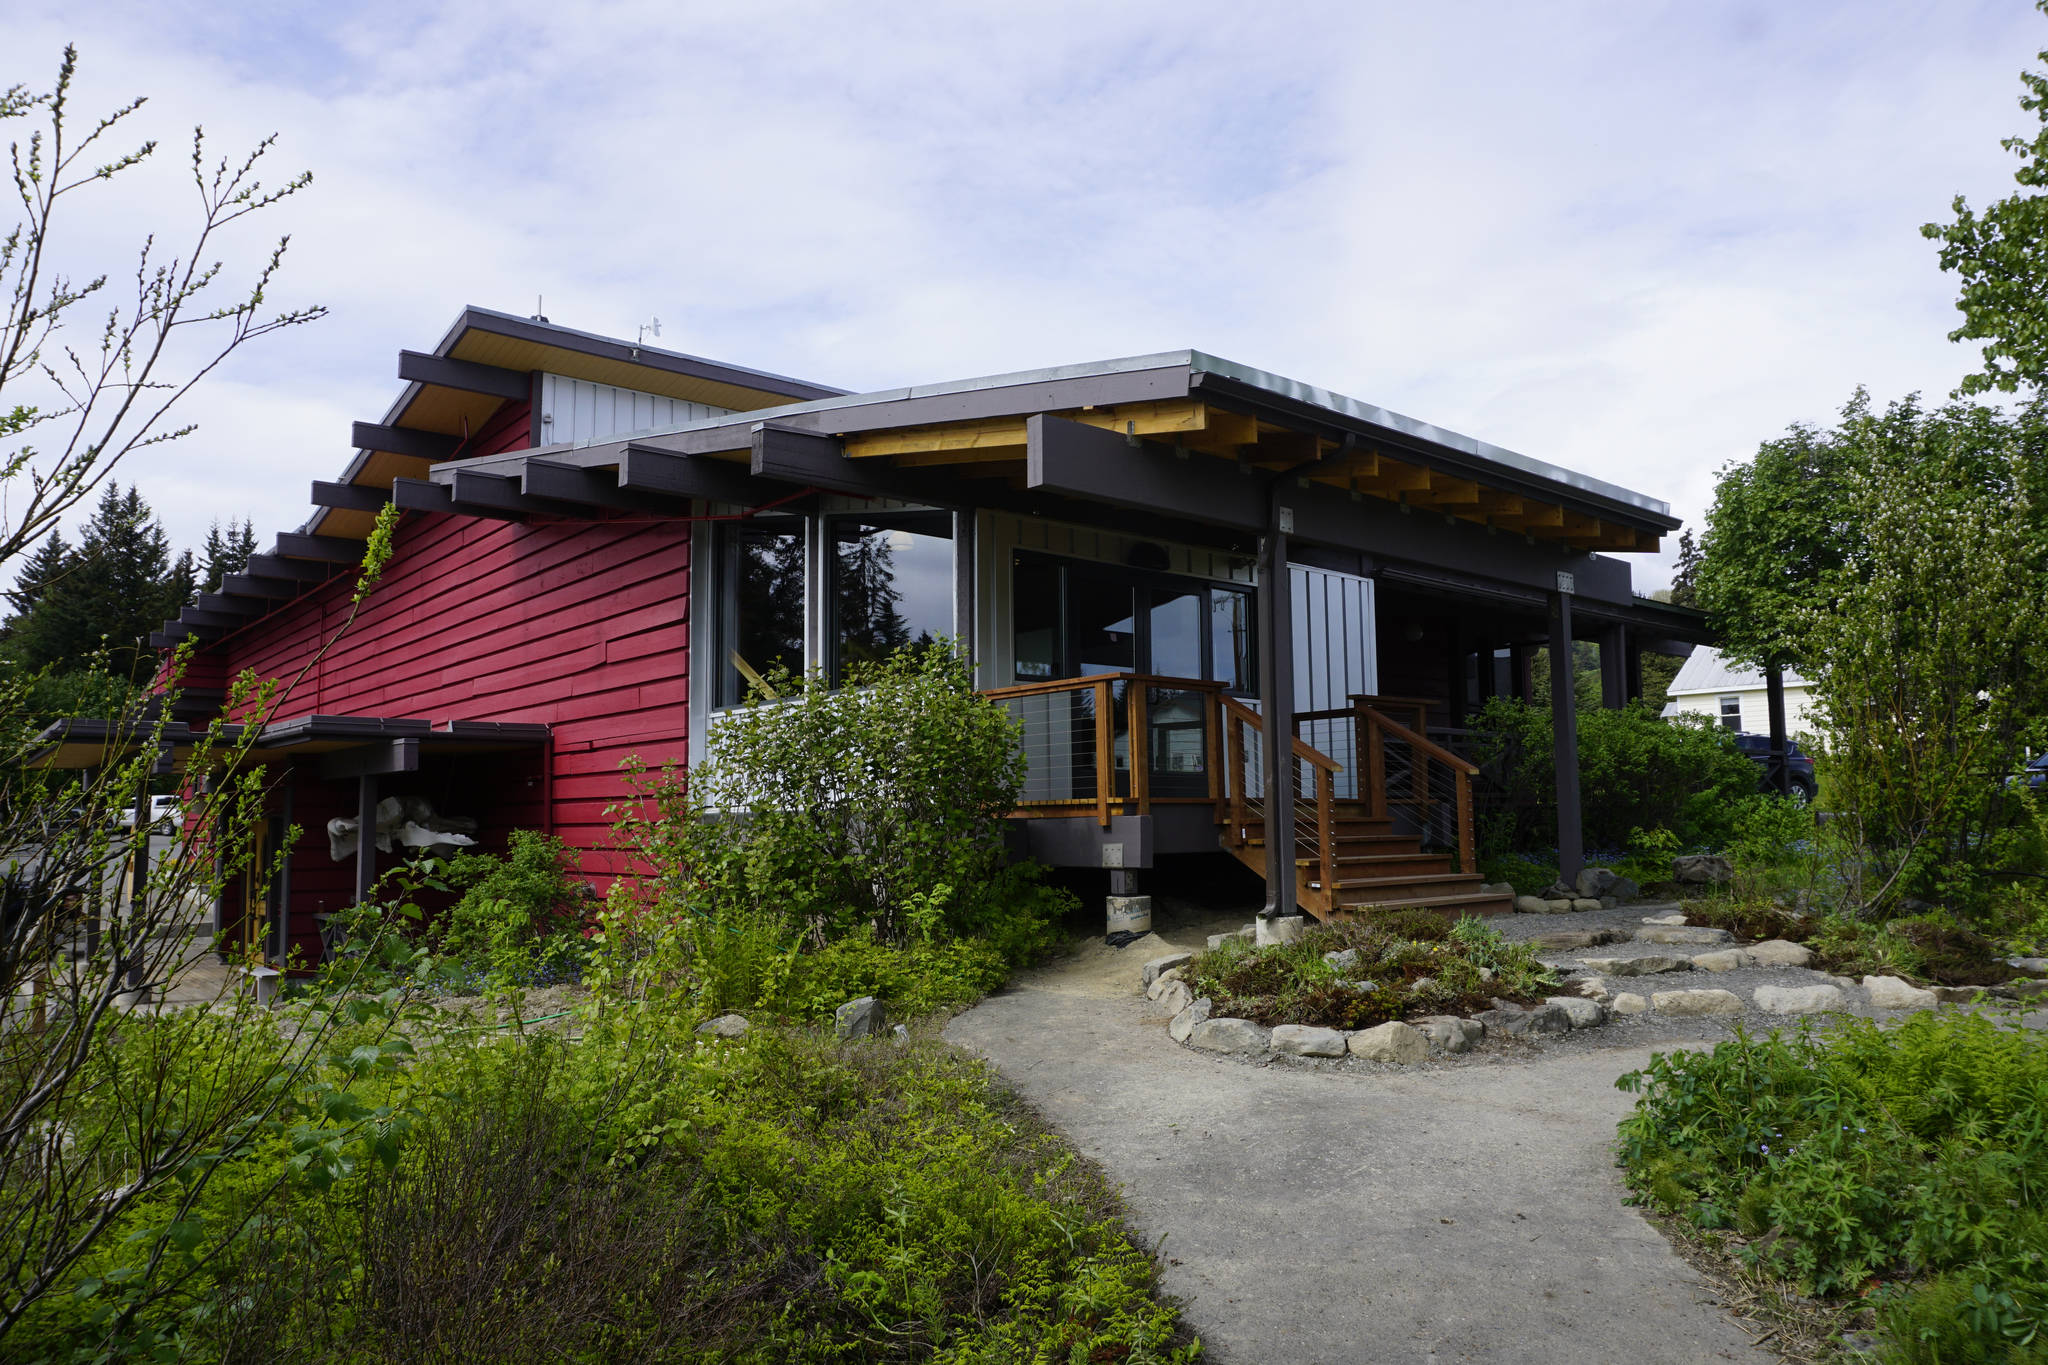 The remodeled Pratt Museum, as seen on May 25, 2019, in Homer, Alaska. The front entrance has been redone, adding some extra space and new steps. Handicap accessibility is to the right of the new entrance through the old porch. (Photo by Michael Armstrong/Homer News)